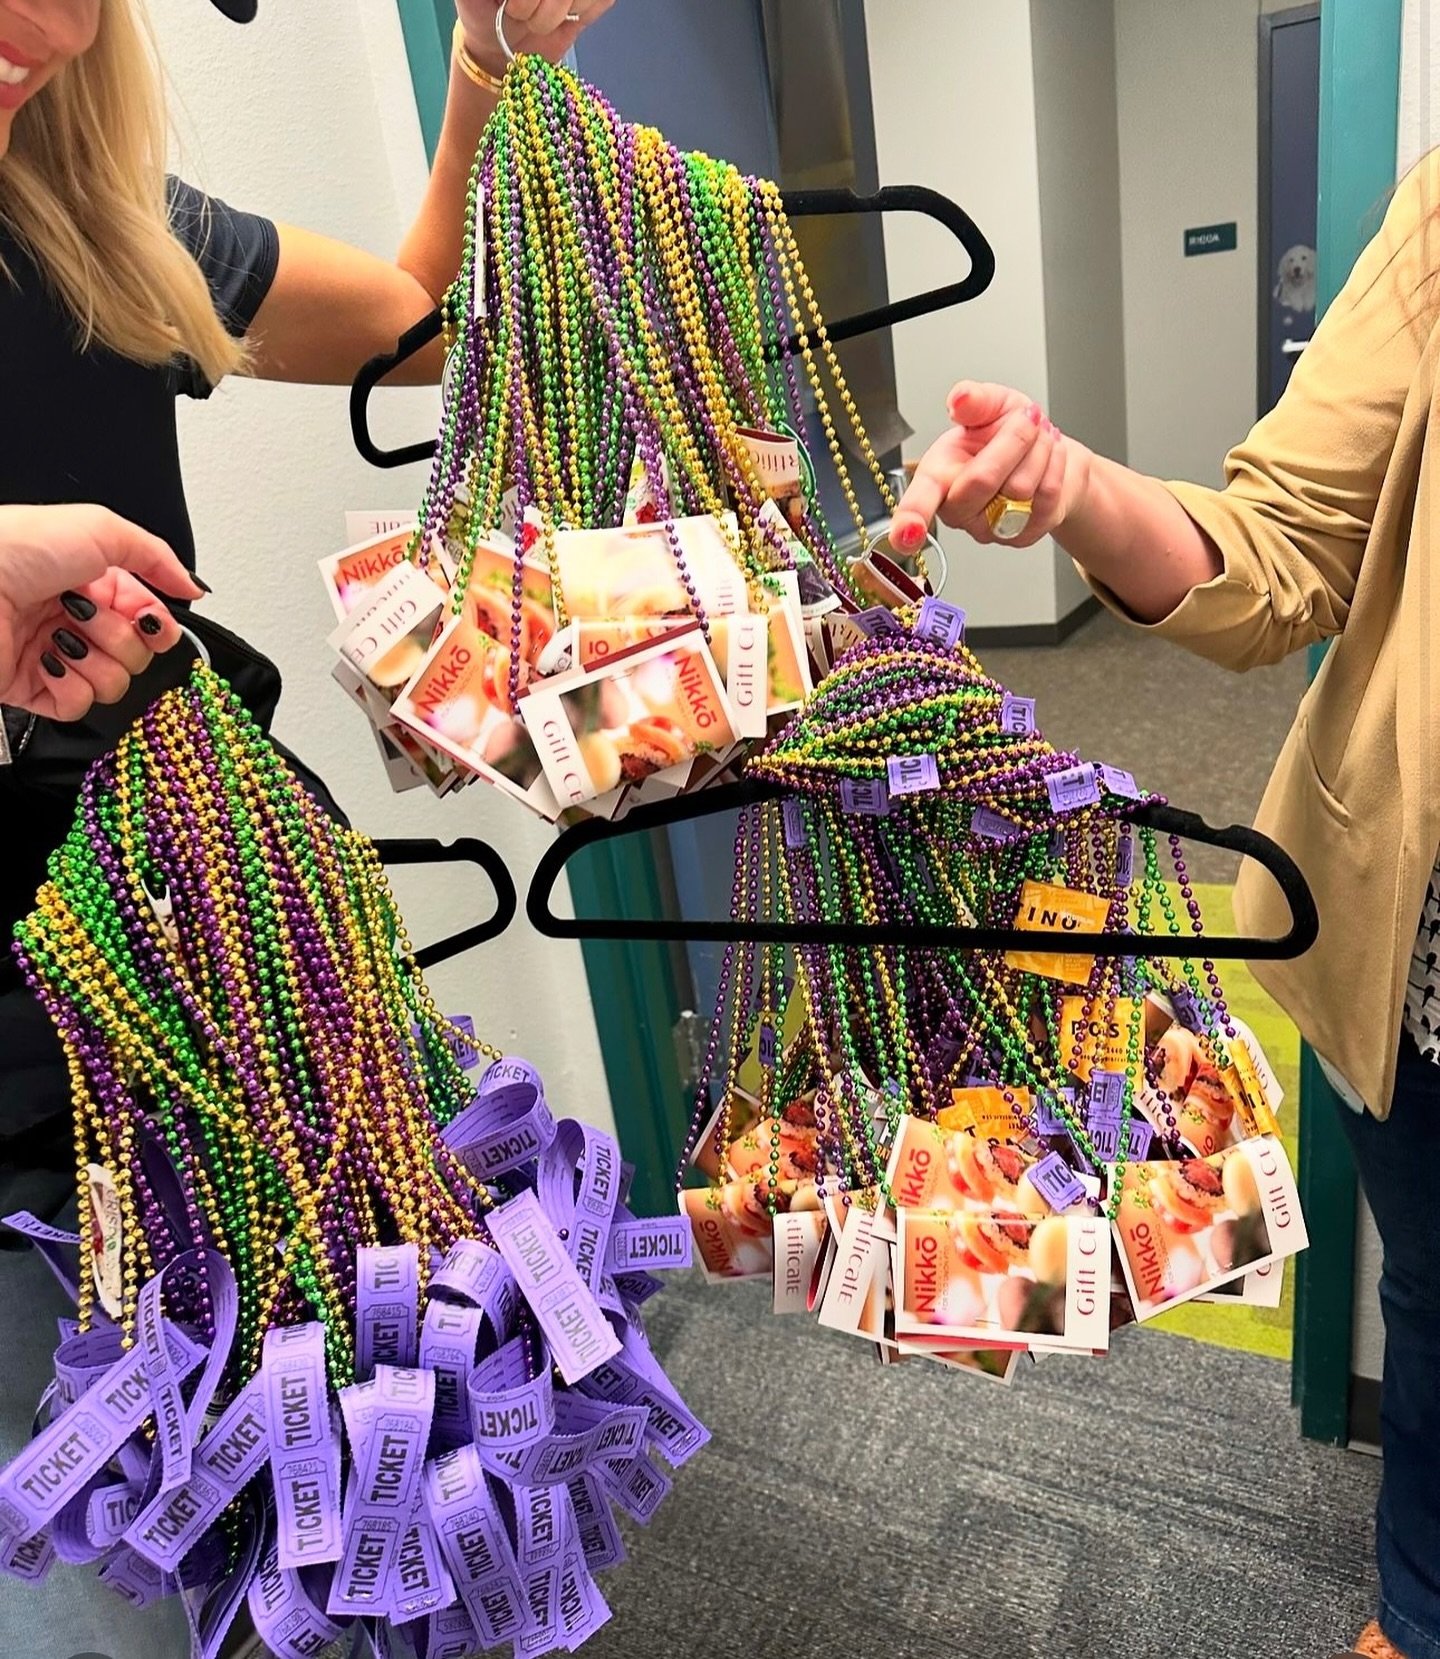 We&rsquo;re thrilled to have had the opportunity to present each teacher and staff member at a local Southlake Elementary School, supported by The Old Union Elementary Parent Teacher Organization (PTO), with a Nikko gift voucher, celebrating Teacher 